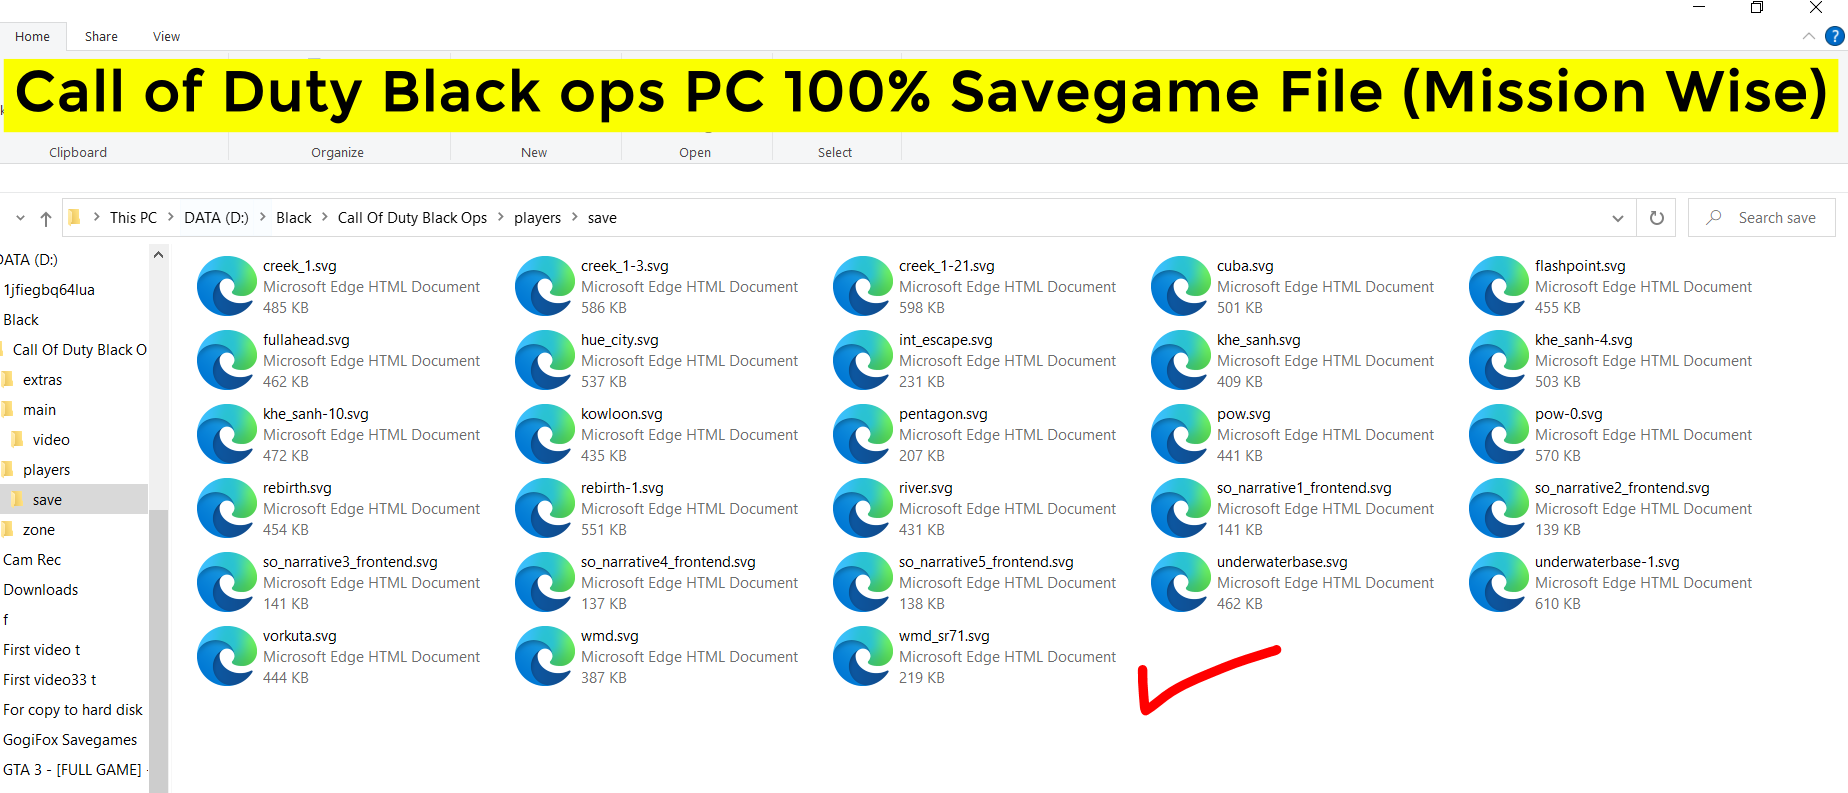 Call of Duty black ops PC 100% Savegame File (Mission Wise -After Each Mission)